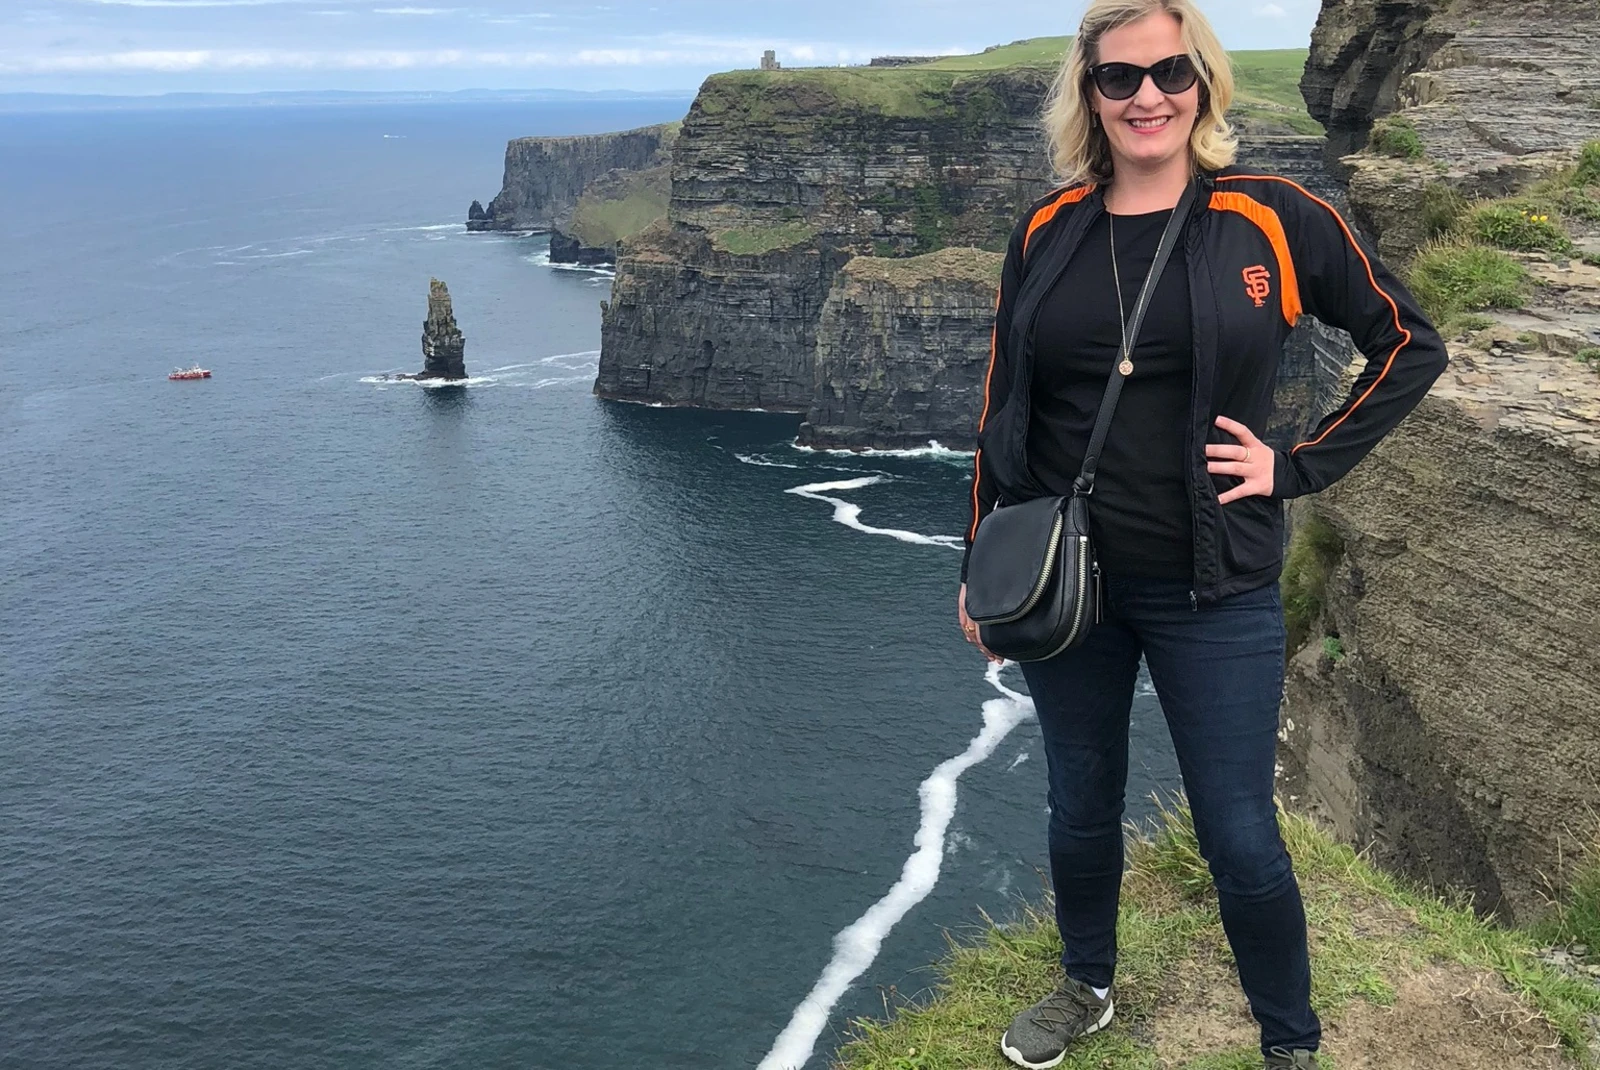 Journey Through Ireland: A Girls' Road Trip from Dublin to Limerick - Road trip highlights